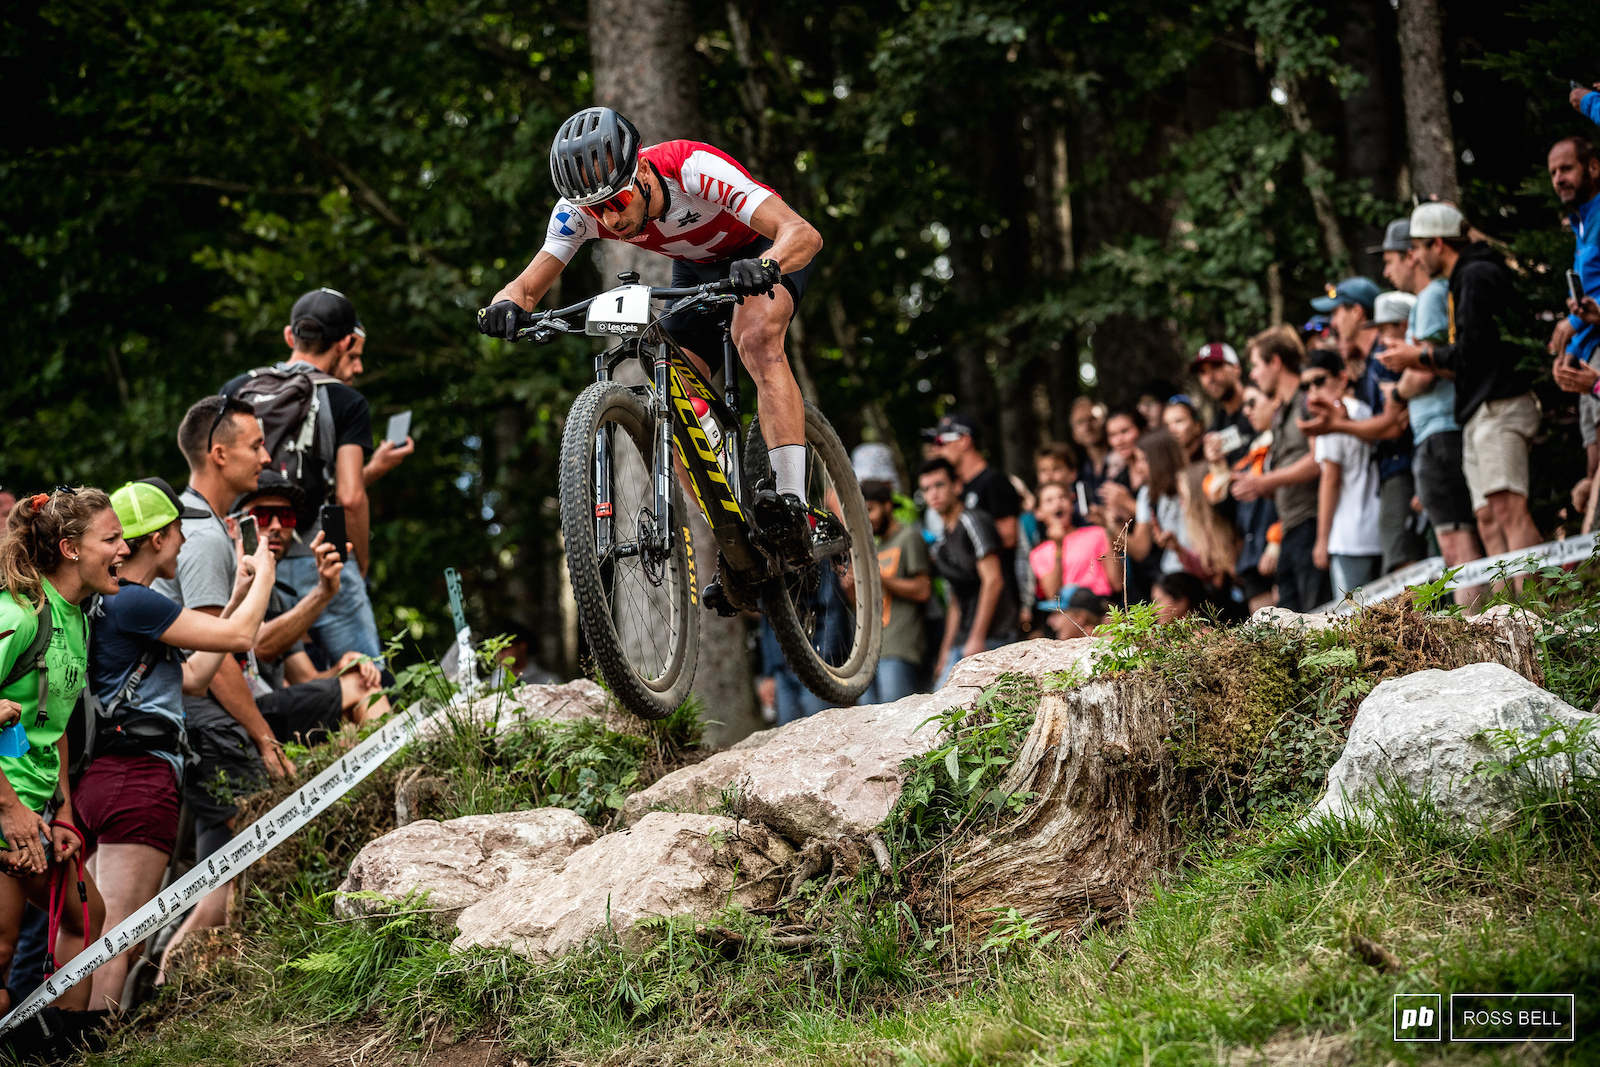 Nino Schurter laid down the marker early on and commanded how the race was going to play out.